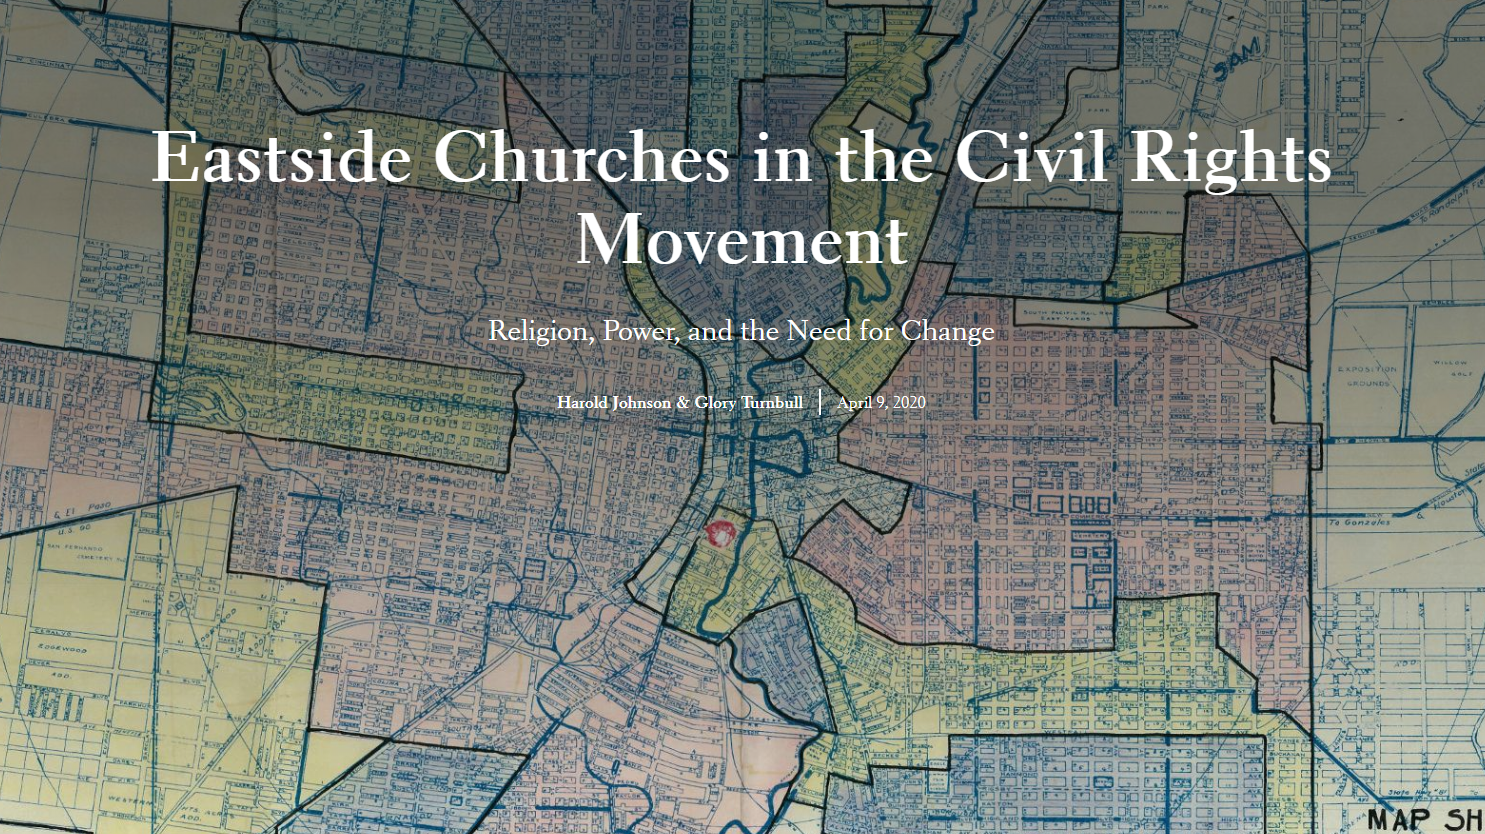 Eastside Churches in the Civil Rights Movement